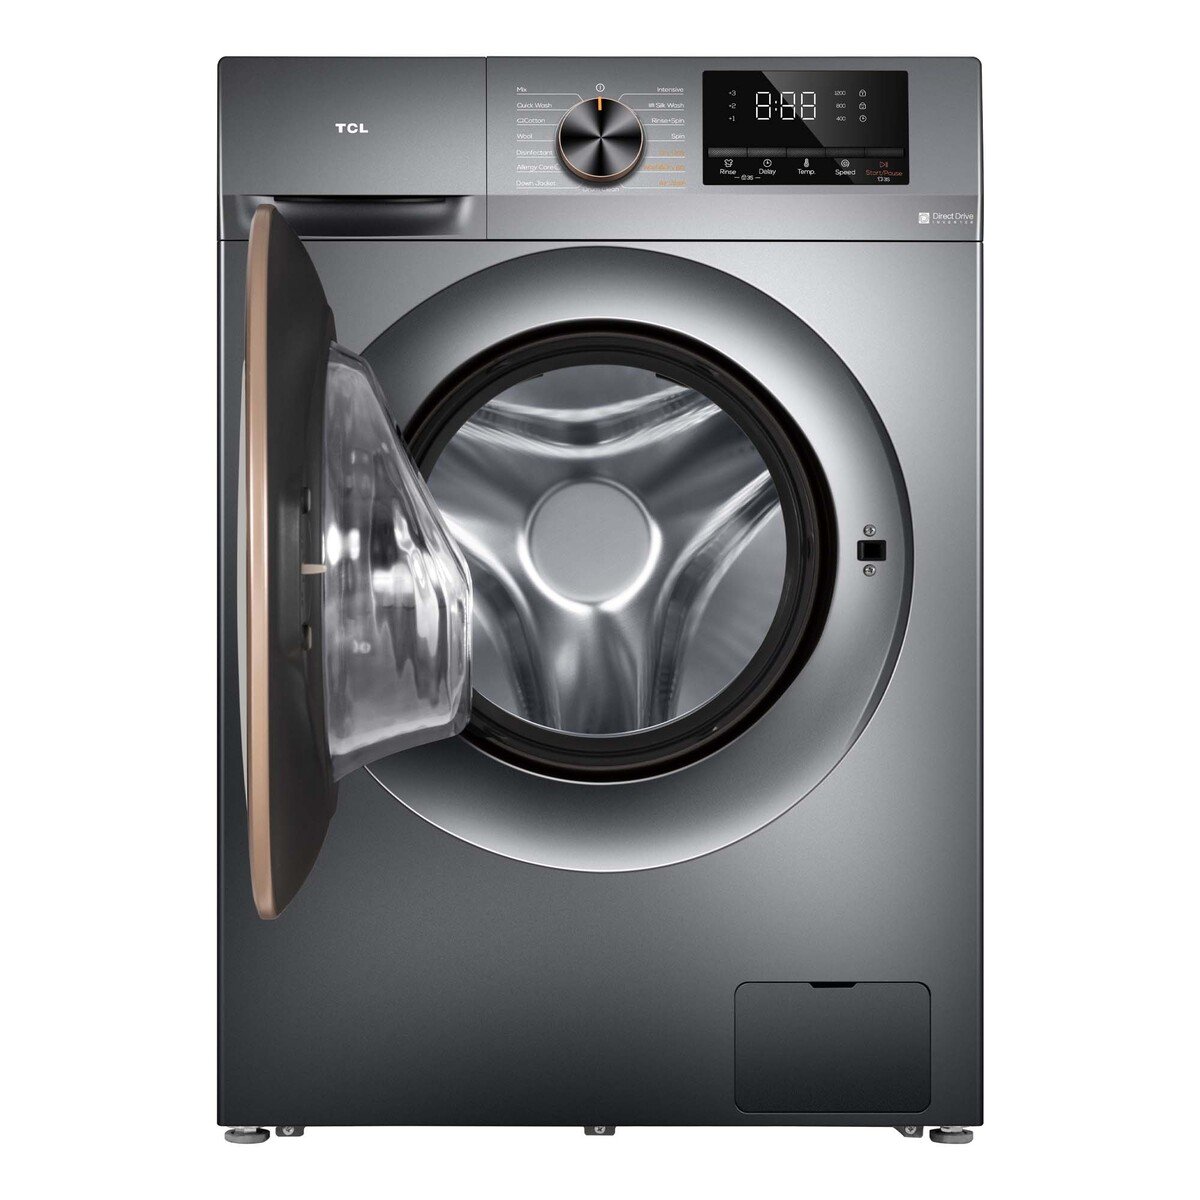 TCL Fully Automatic Front Loading Washing Machine, 10 Kg Washer & 6 Kg Dryer, 1200 RPM, Star Grey, C210WDG